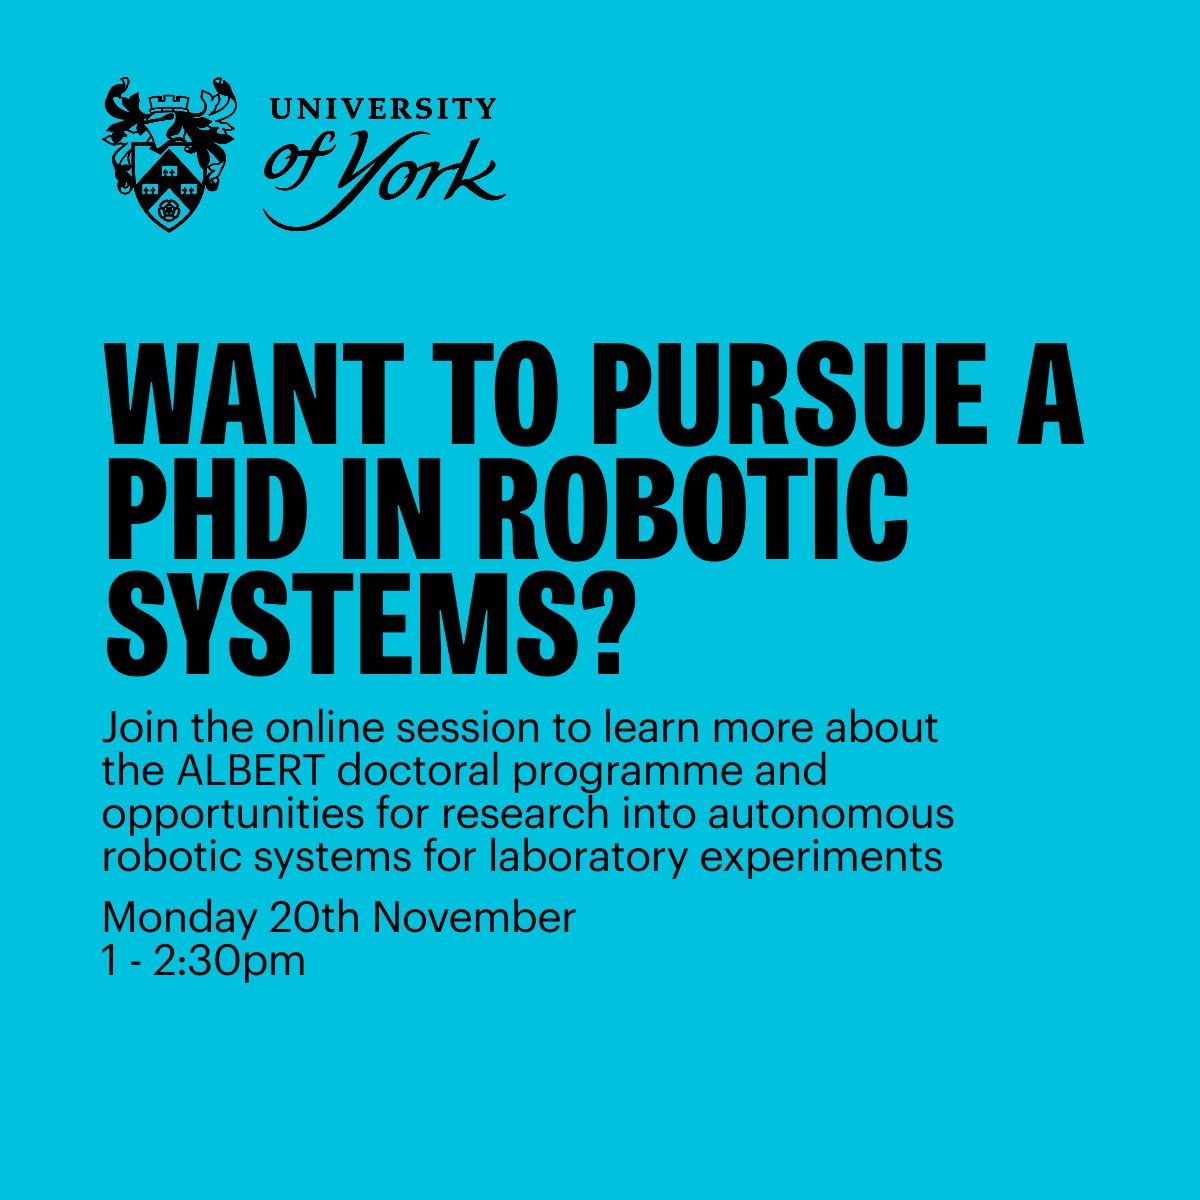 Thinking about a PhD in Autonomous Robotic Systems for Laboratory Experiments (@yorrobots ALBERT CDT) @UniOfYork? Find out about projects & supervisors on Monday! Book your place now bit.ly/Albert-CDT @UoY_CS @UoY_PET @ChemistryatYork @UoYSociology @YorkPsychology @UoYLaw